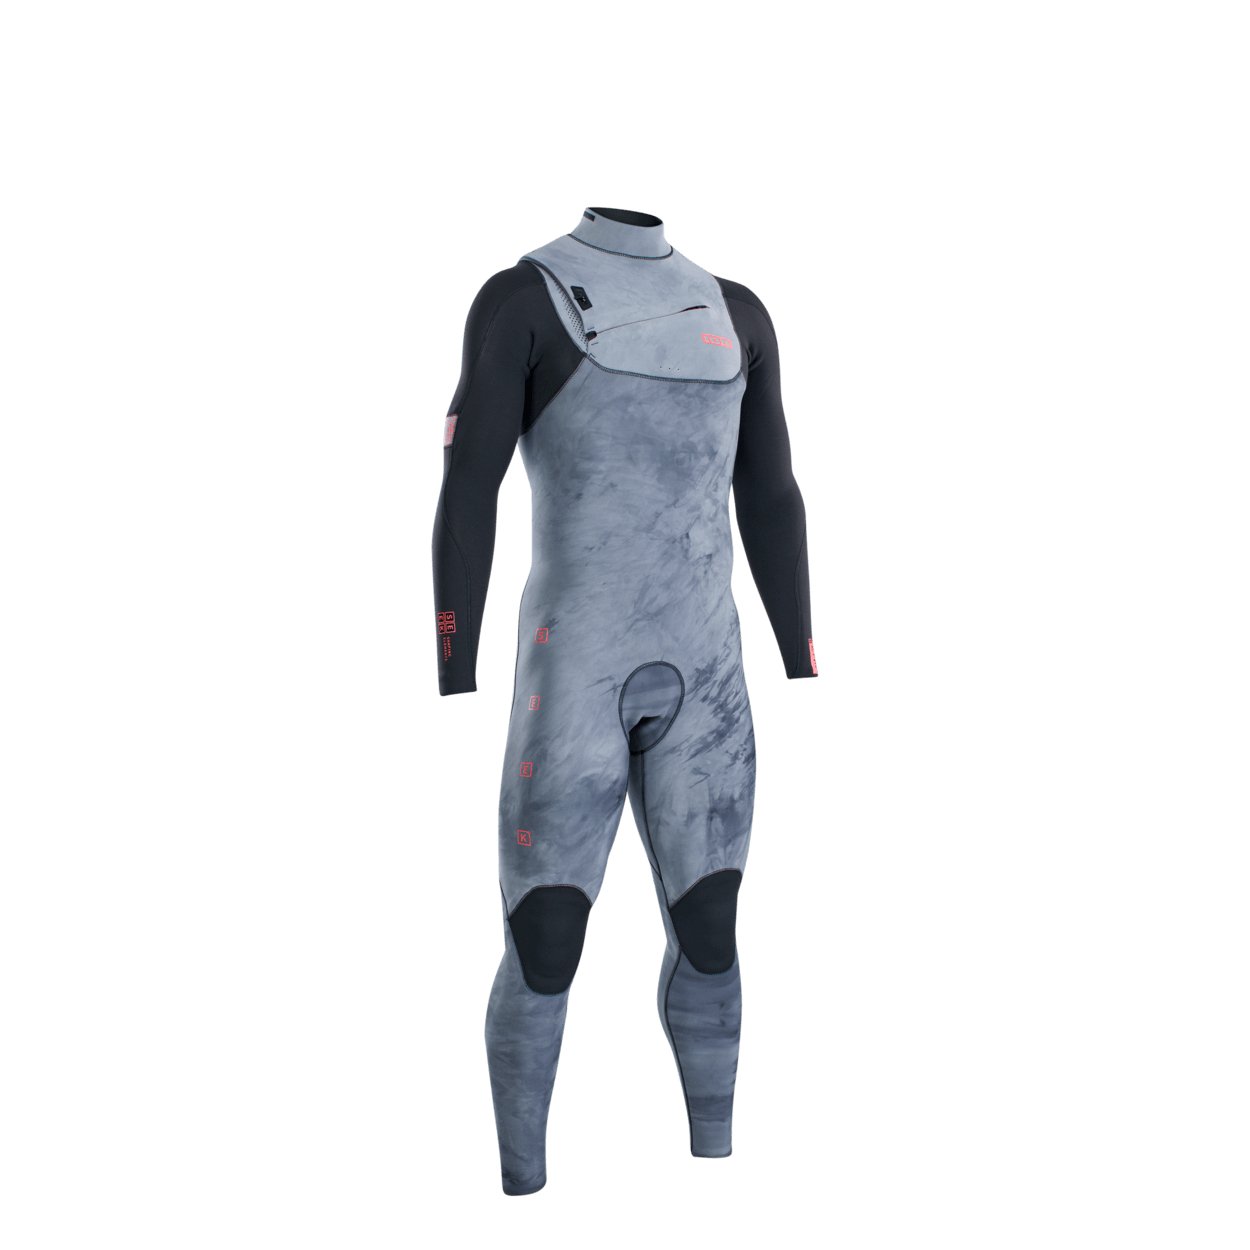 ION Seek Amp 4/3 Front Zip 2022 - Worthing Watersports - 9010583056272 - Wetsuits - ION Water